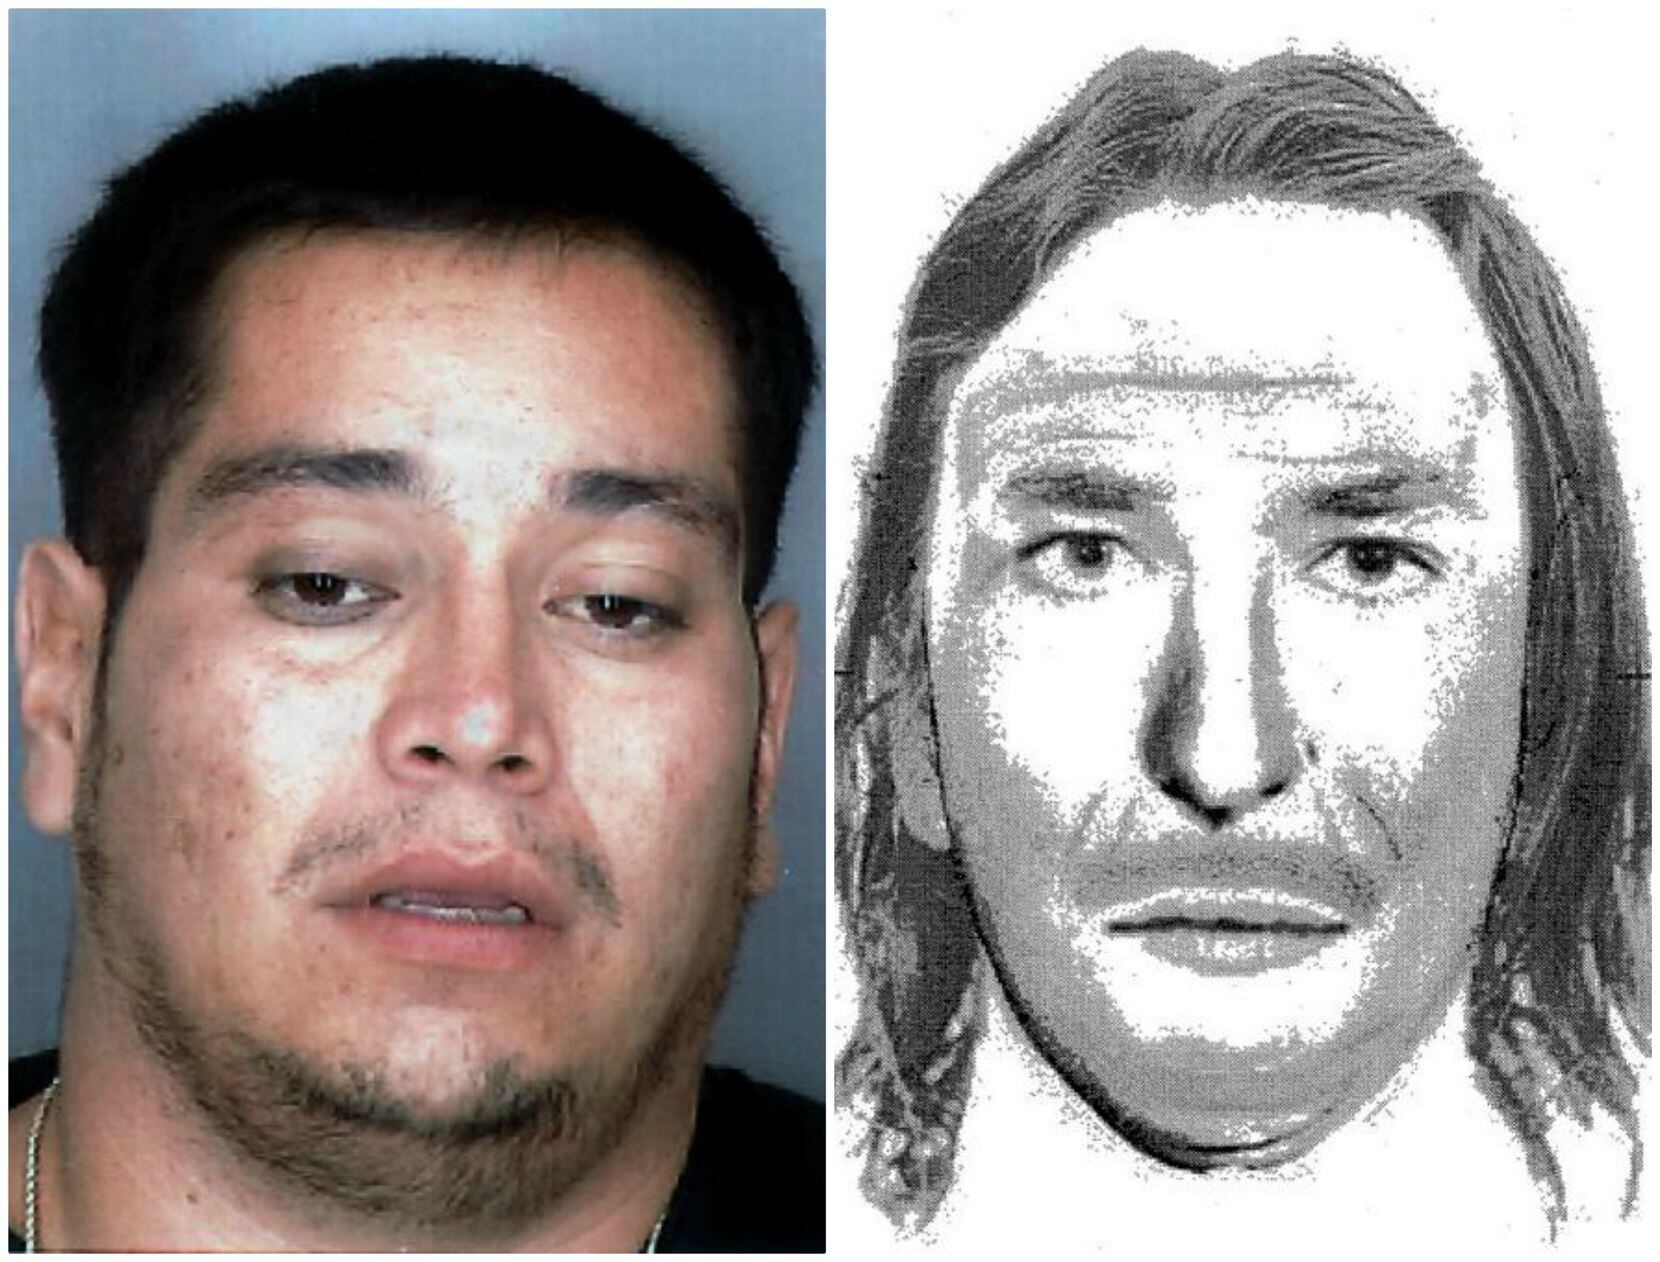 Charles Don Flores' mugshot bears little resemblance to a sketch based on an eyewitness's...